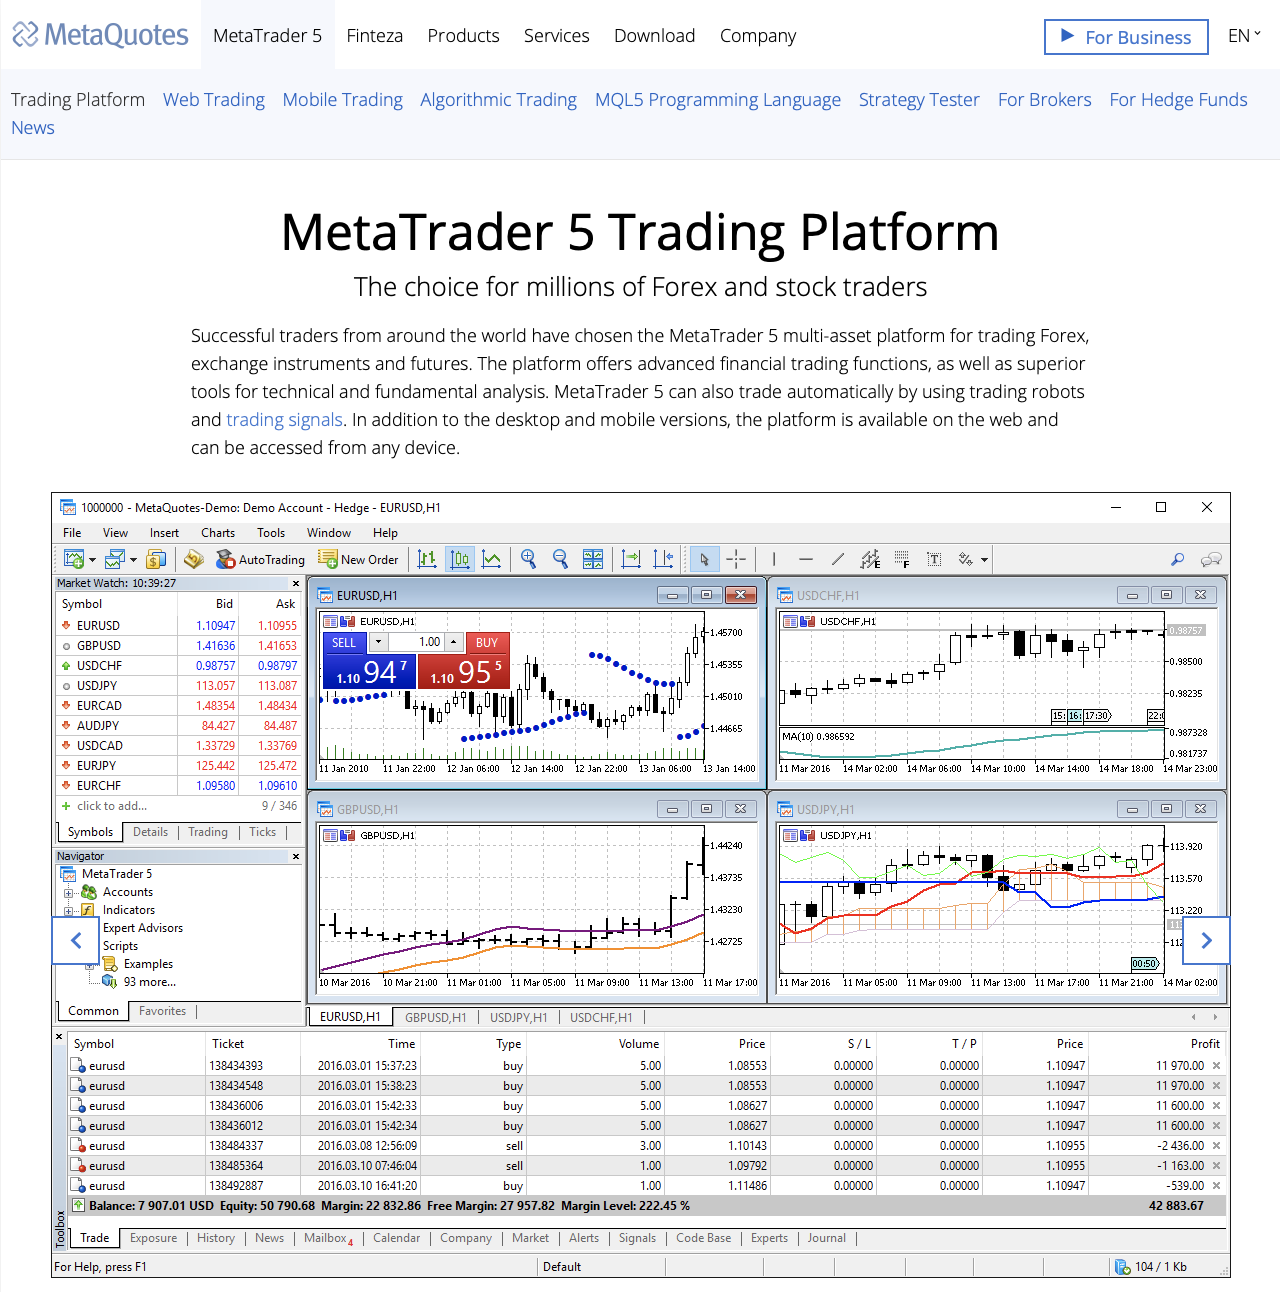 MetaTrader 5 a MetaQuotes-on